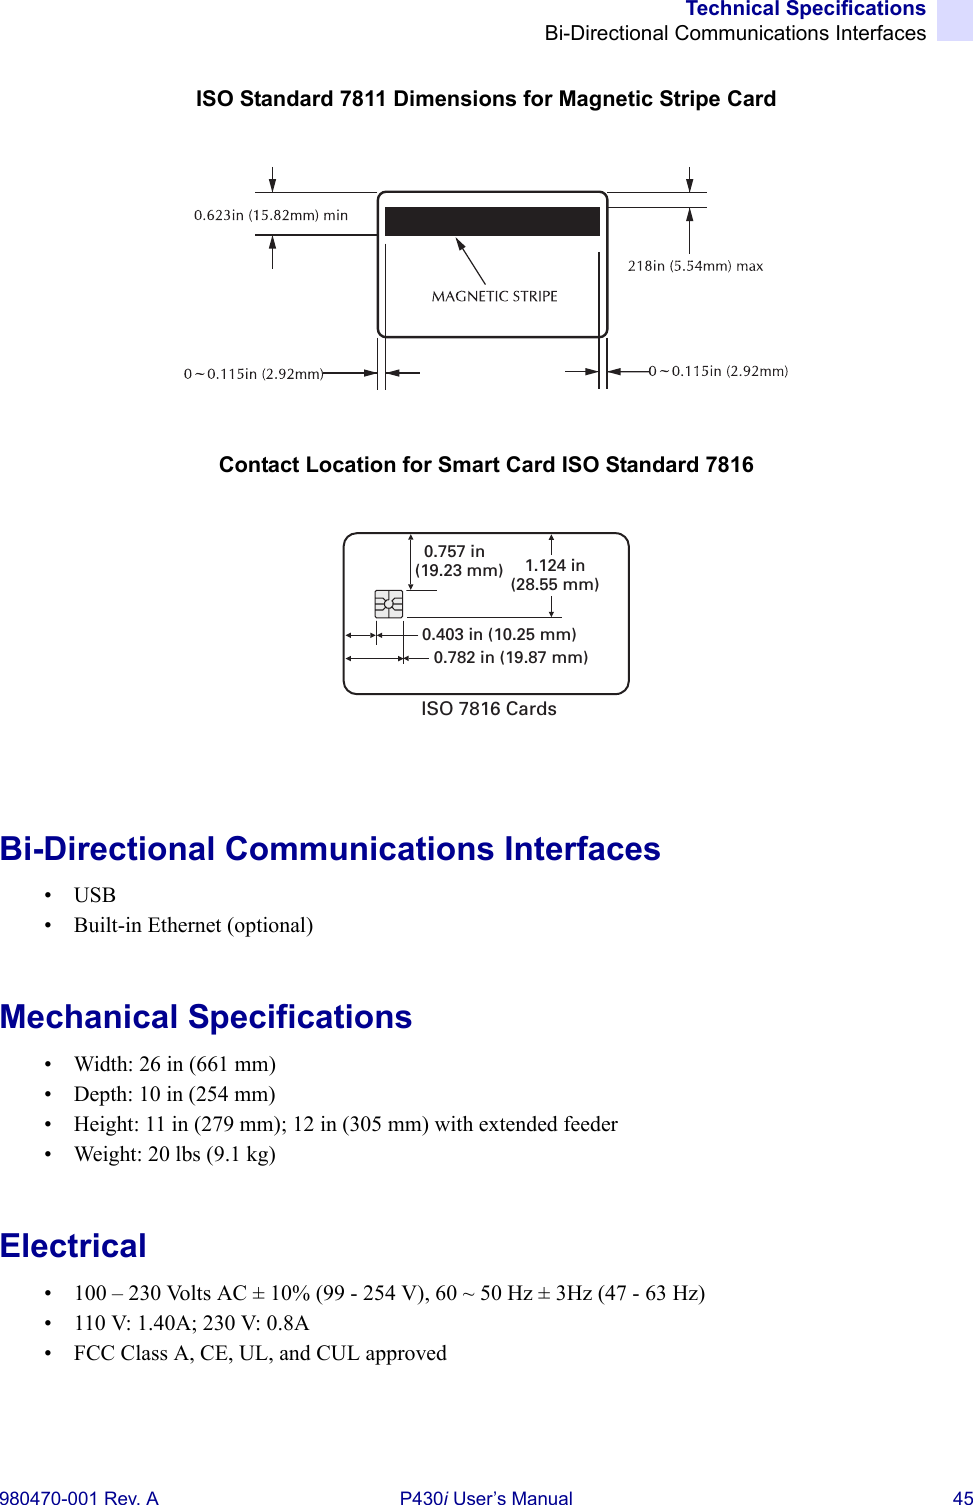 Technical SpecificationsBi-Directional Communications Interfaces980470-001 Rev. A P430i User’s Manual 45ISO Standard 7811 Dimensions for Magnetic Stripe CardContact Location for Smart Card ISO Standard 7816Bi-Directional Communications Interfaces•USB• Built-in Ethernet (optional)Mechanical Specifications• Width: 26 in (661 mm)• Depth: 10 in (254 mm)• Height: 11 in (279 mm); 12 in (305 mm) with extended feeder• Weight: 20 lbs (9.1 kg)Electrical• 100 – 230 Volts AC ± 10% (99 - 254 V), 60 ~ 50 Hz ± 3Hz (47 - 63 Hz)• 110 V: 1.40A; 230 V: 0.8A• FCC Class A, CE, UL, and CUL approved0.403 in (10.25 mm)0.782 in (19.87 mm)0.757 in(19.23 mm) 1.124 in(28.55 mm)ISO 7816 Cards